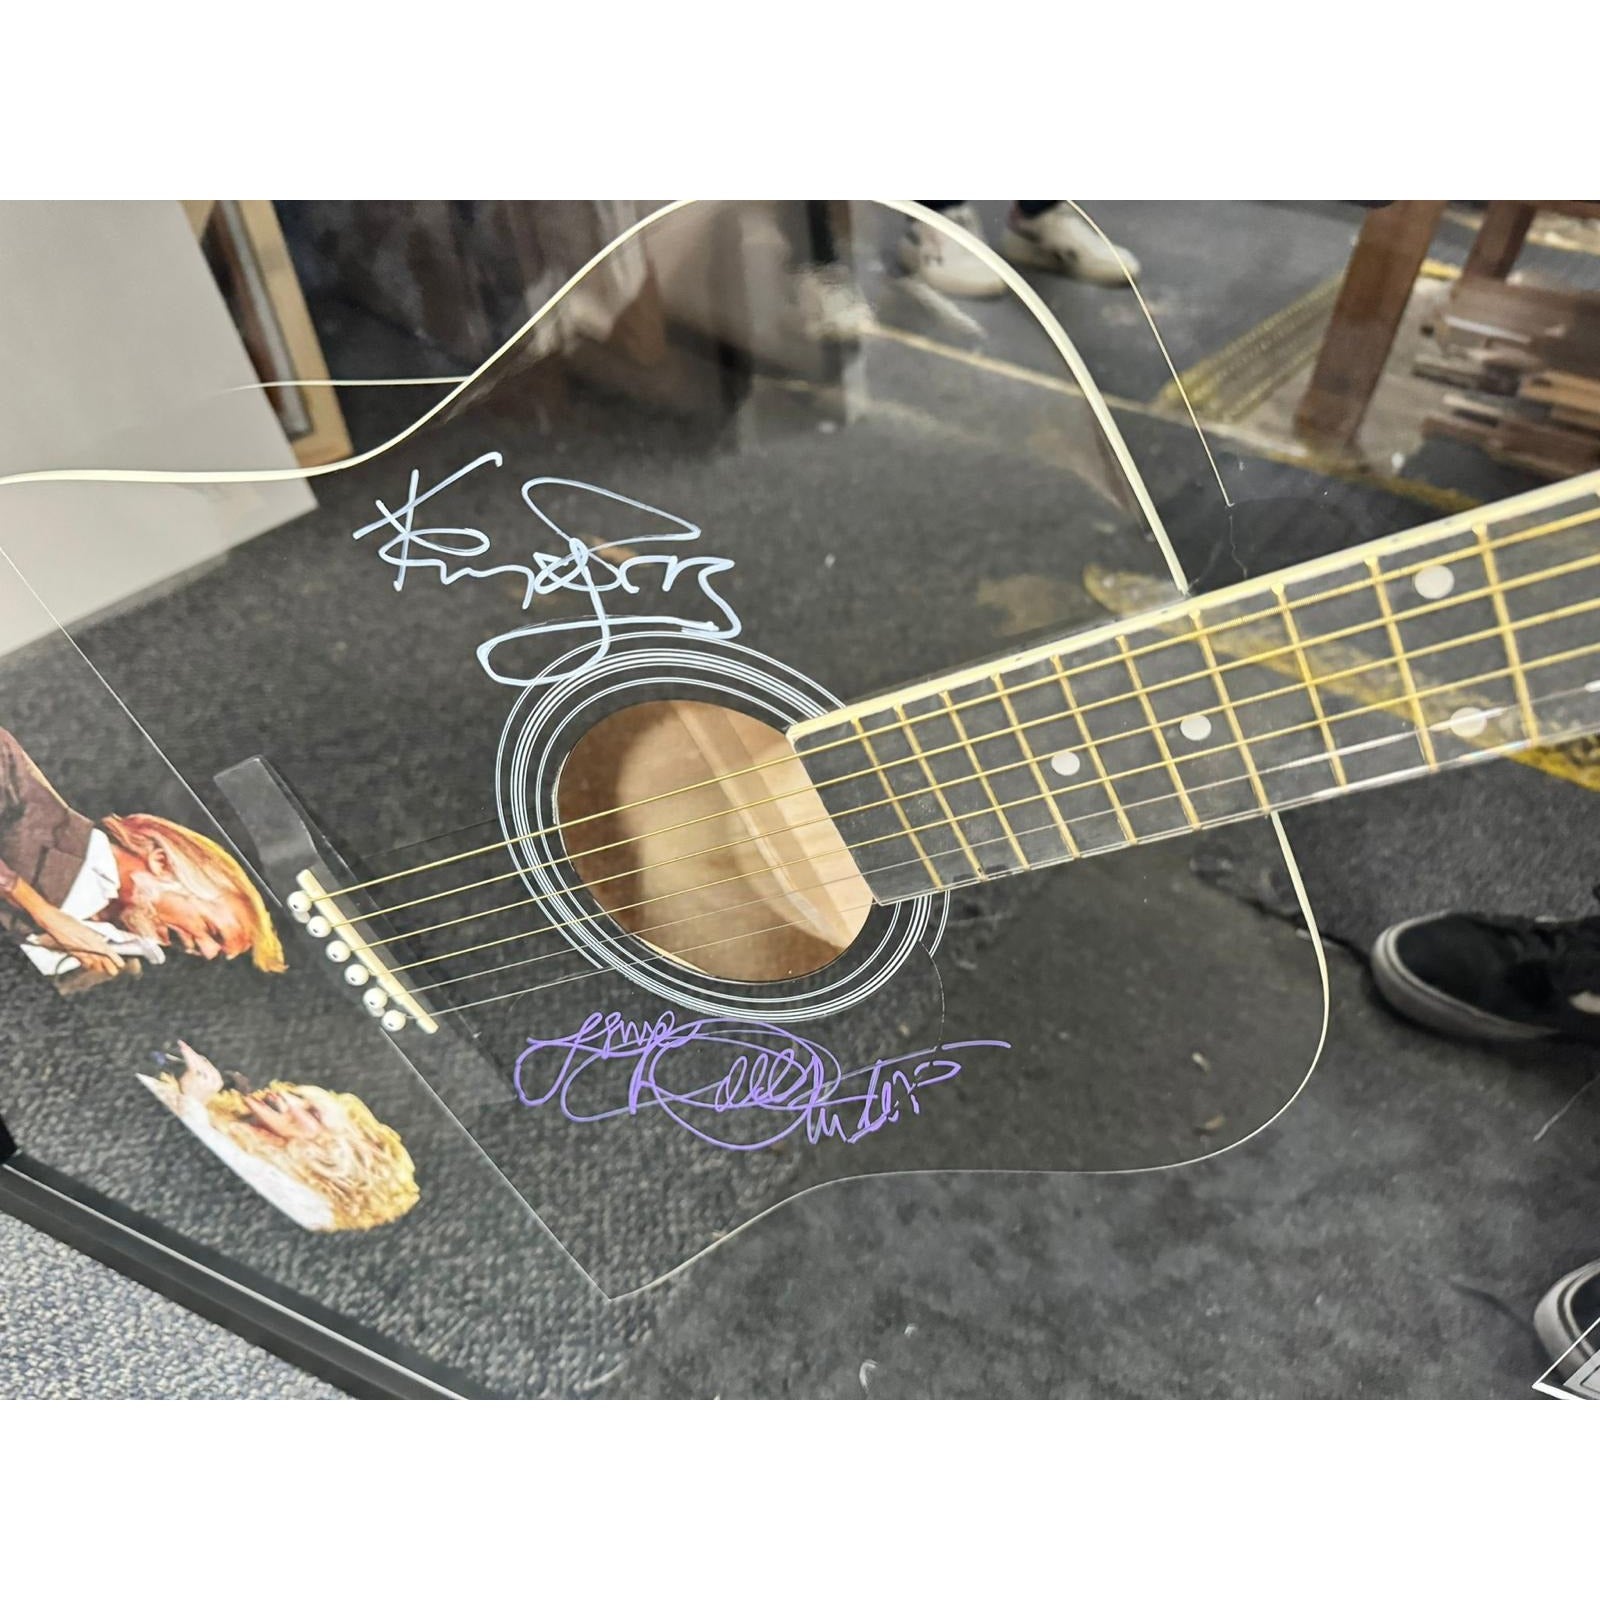 Dolly Parton and Kenny Rogers full size acoustic guitar signed and framed with proof